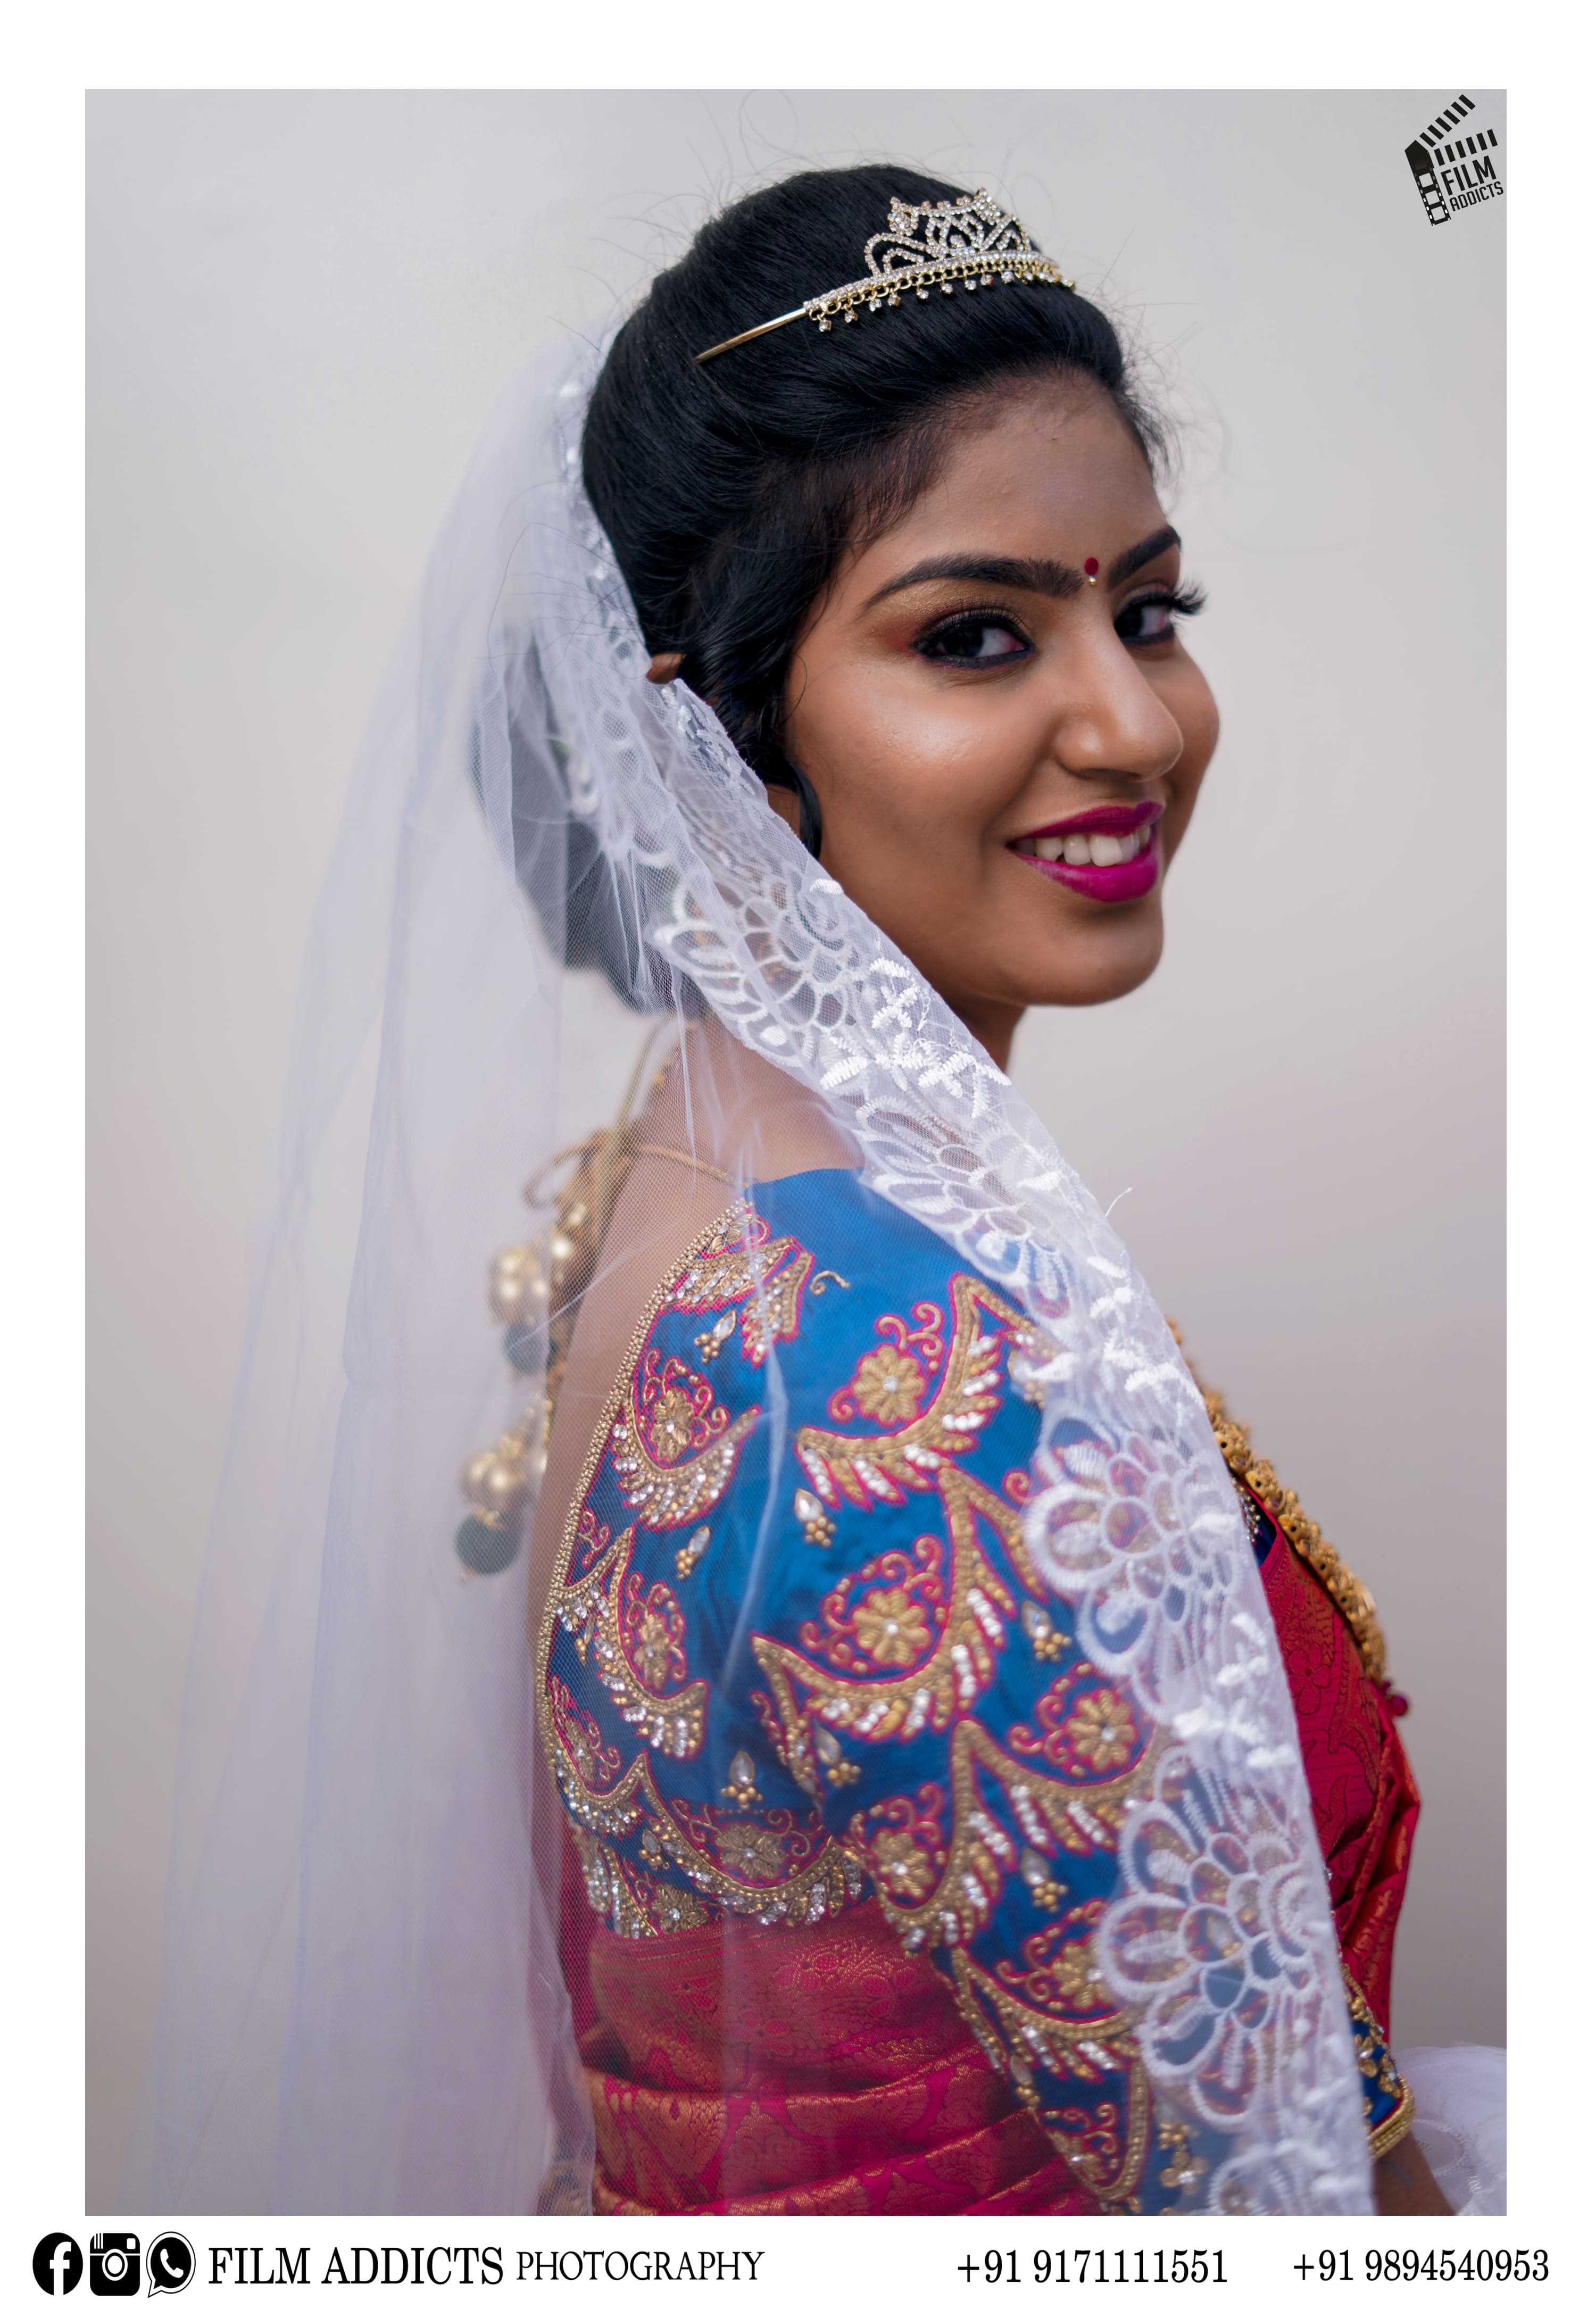 Veena Jagtap's beautiful photoshoot as a Christian bride | Times of India